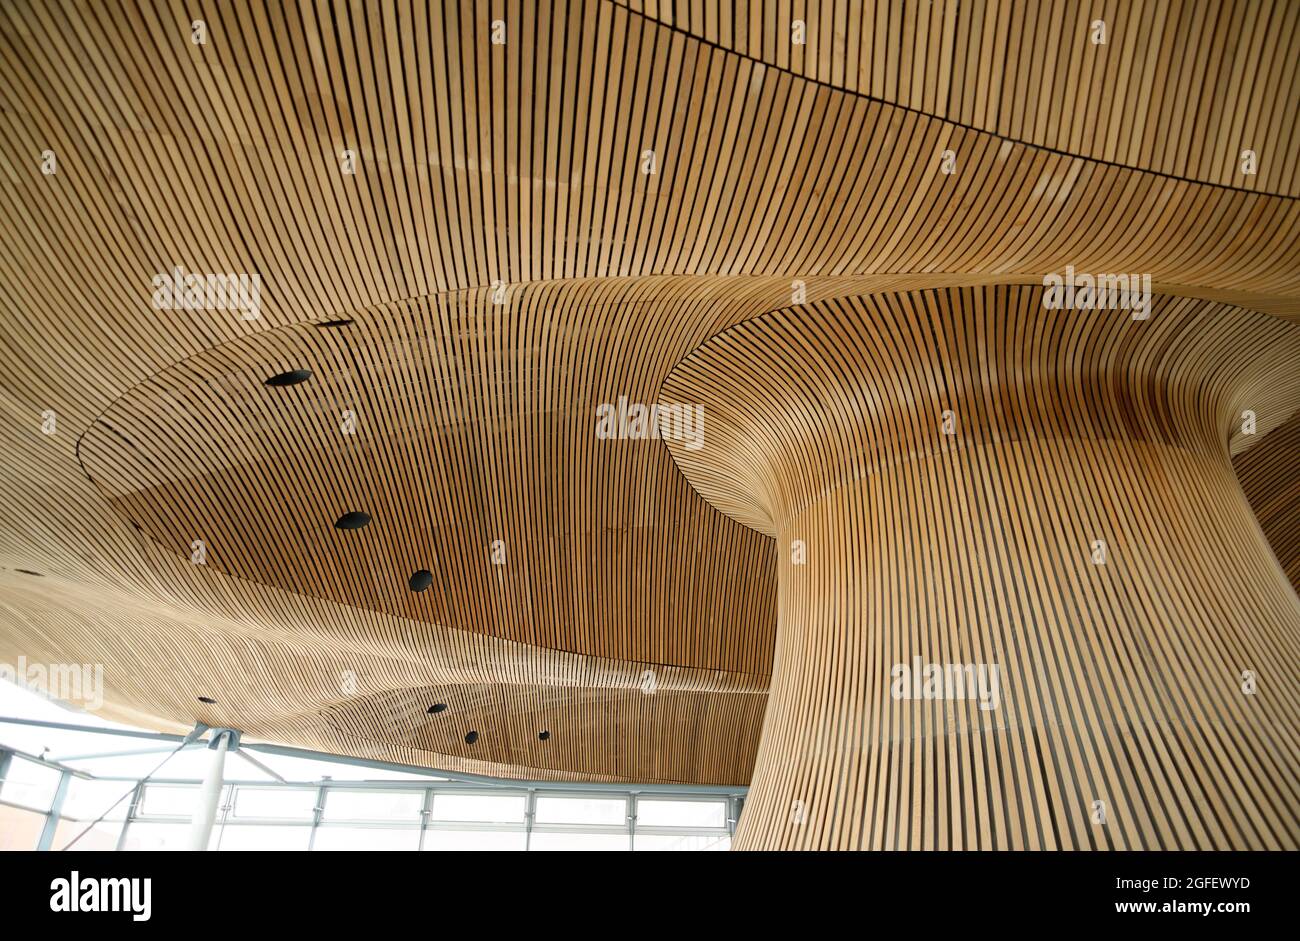 Inside the Welsh Parliament building in Cardiff Bay, Wales. Wavy, mushroom like ceiling/roof made of cedar wood. Richard Rogers designed building. Stock Photo